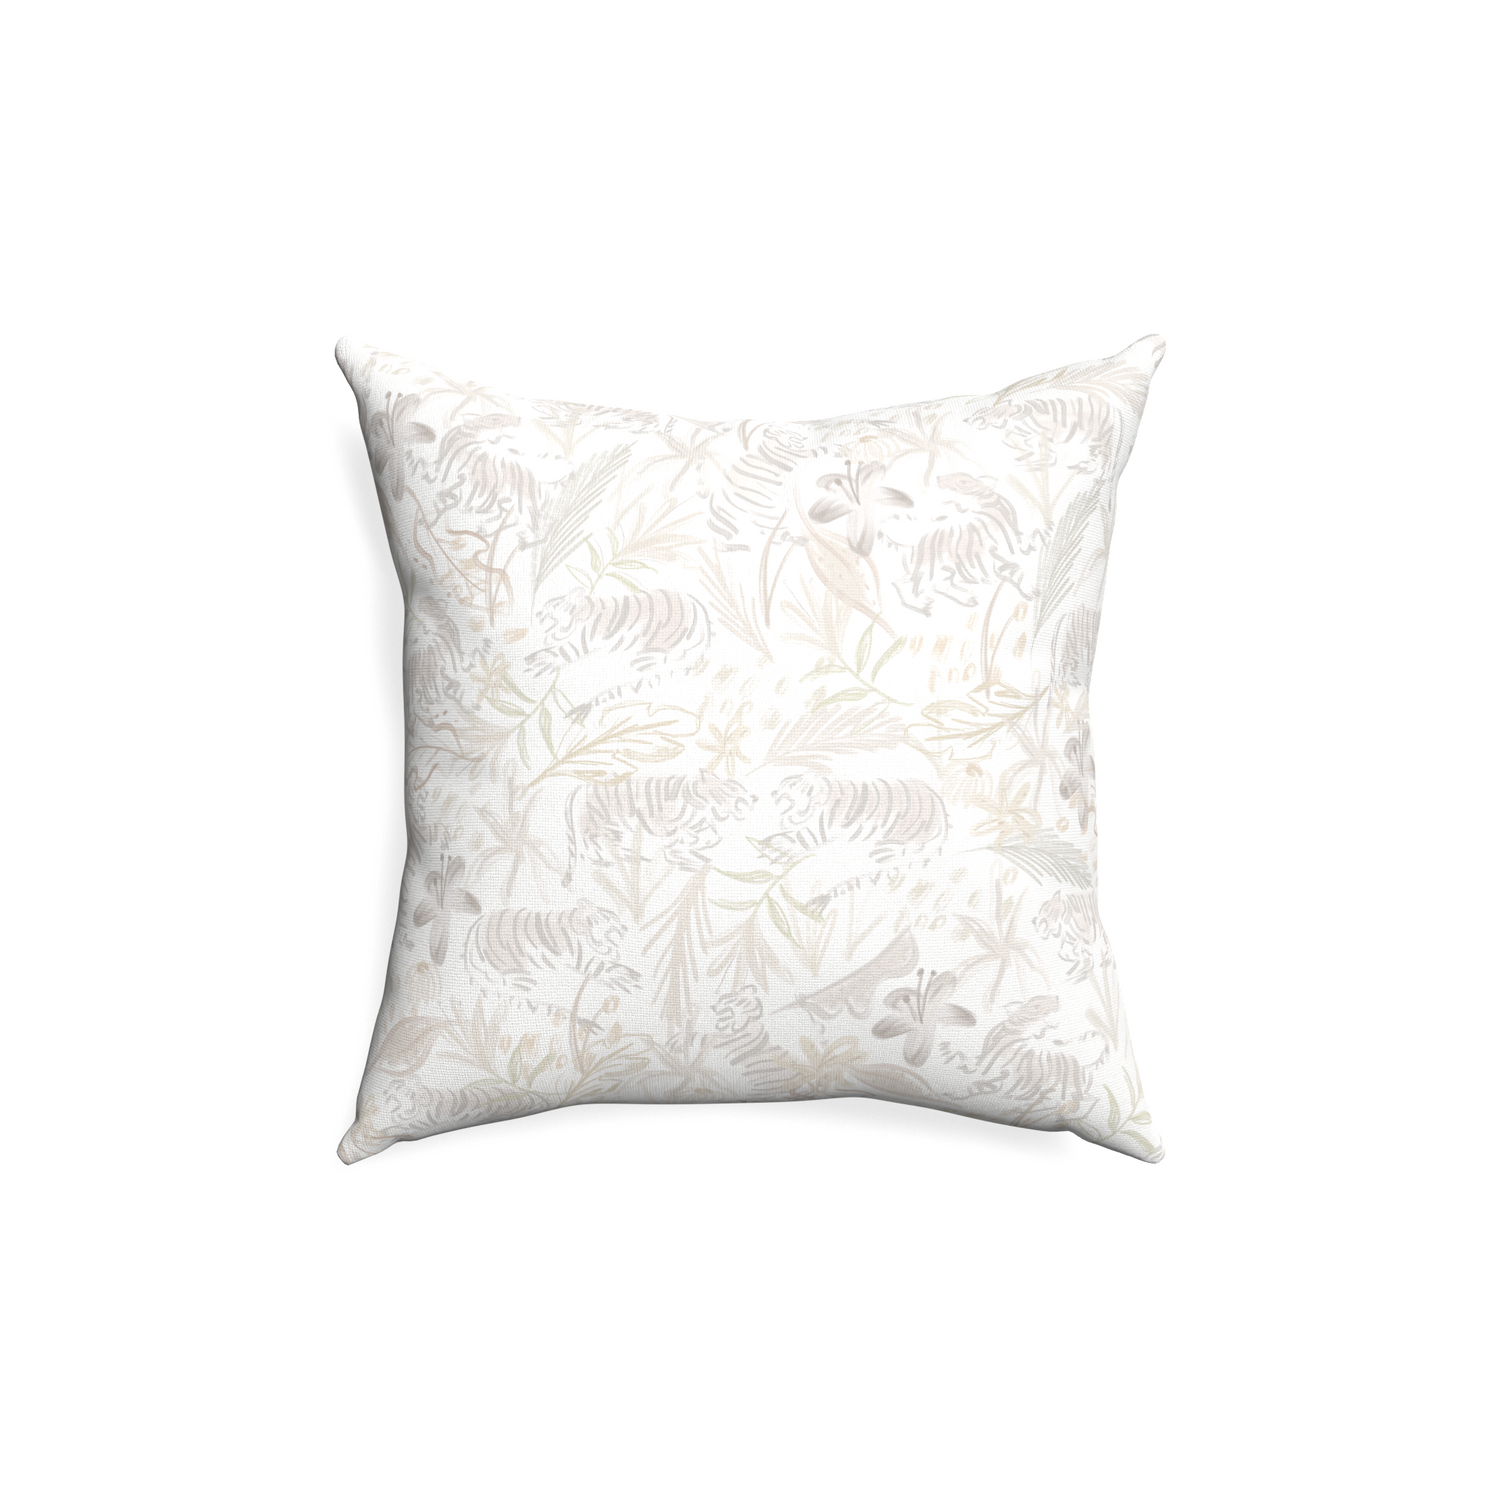 18-square frida sand custom beige chinoiserie tigerpillow with none on white background